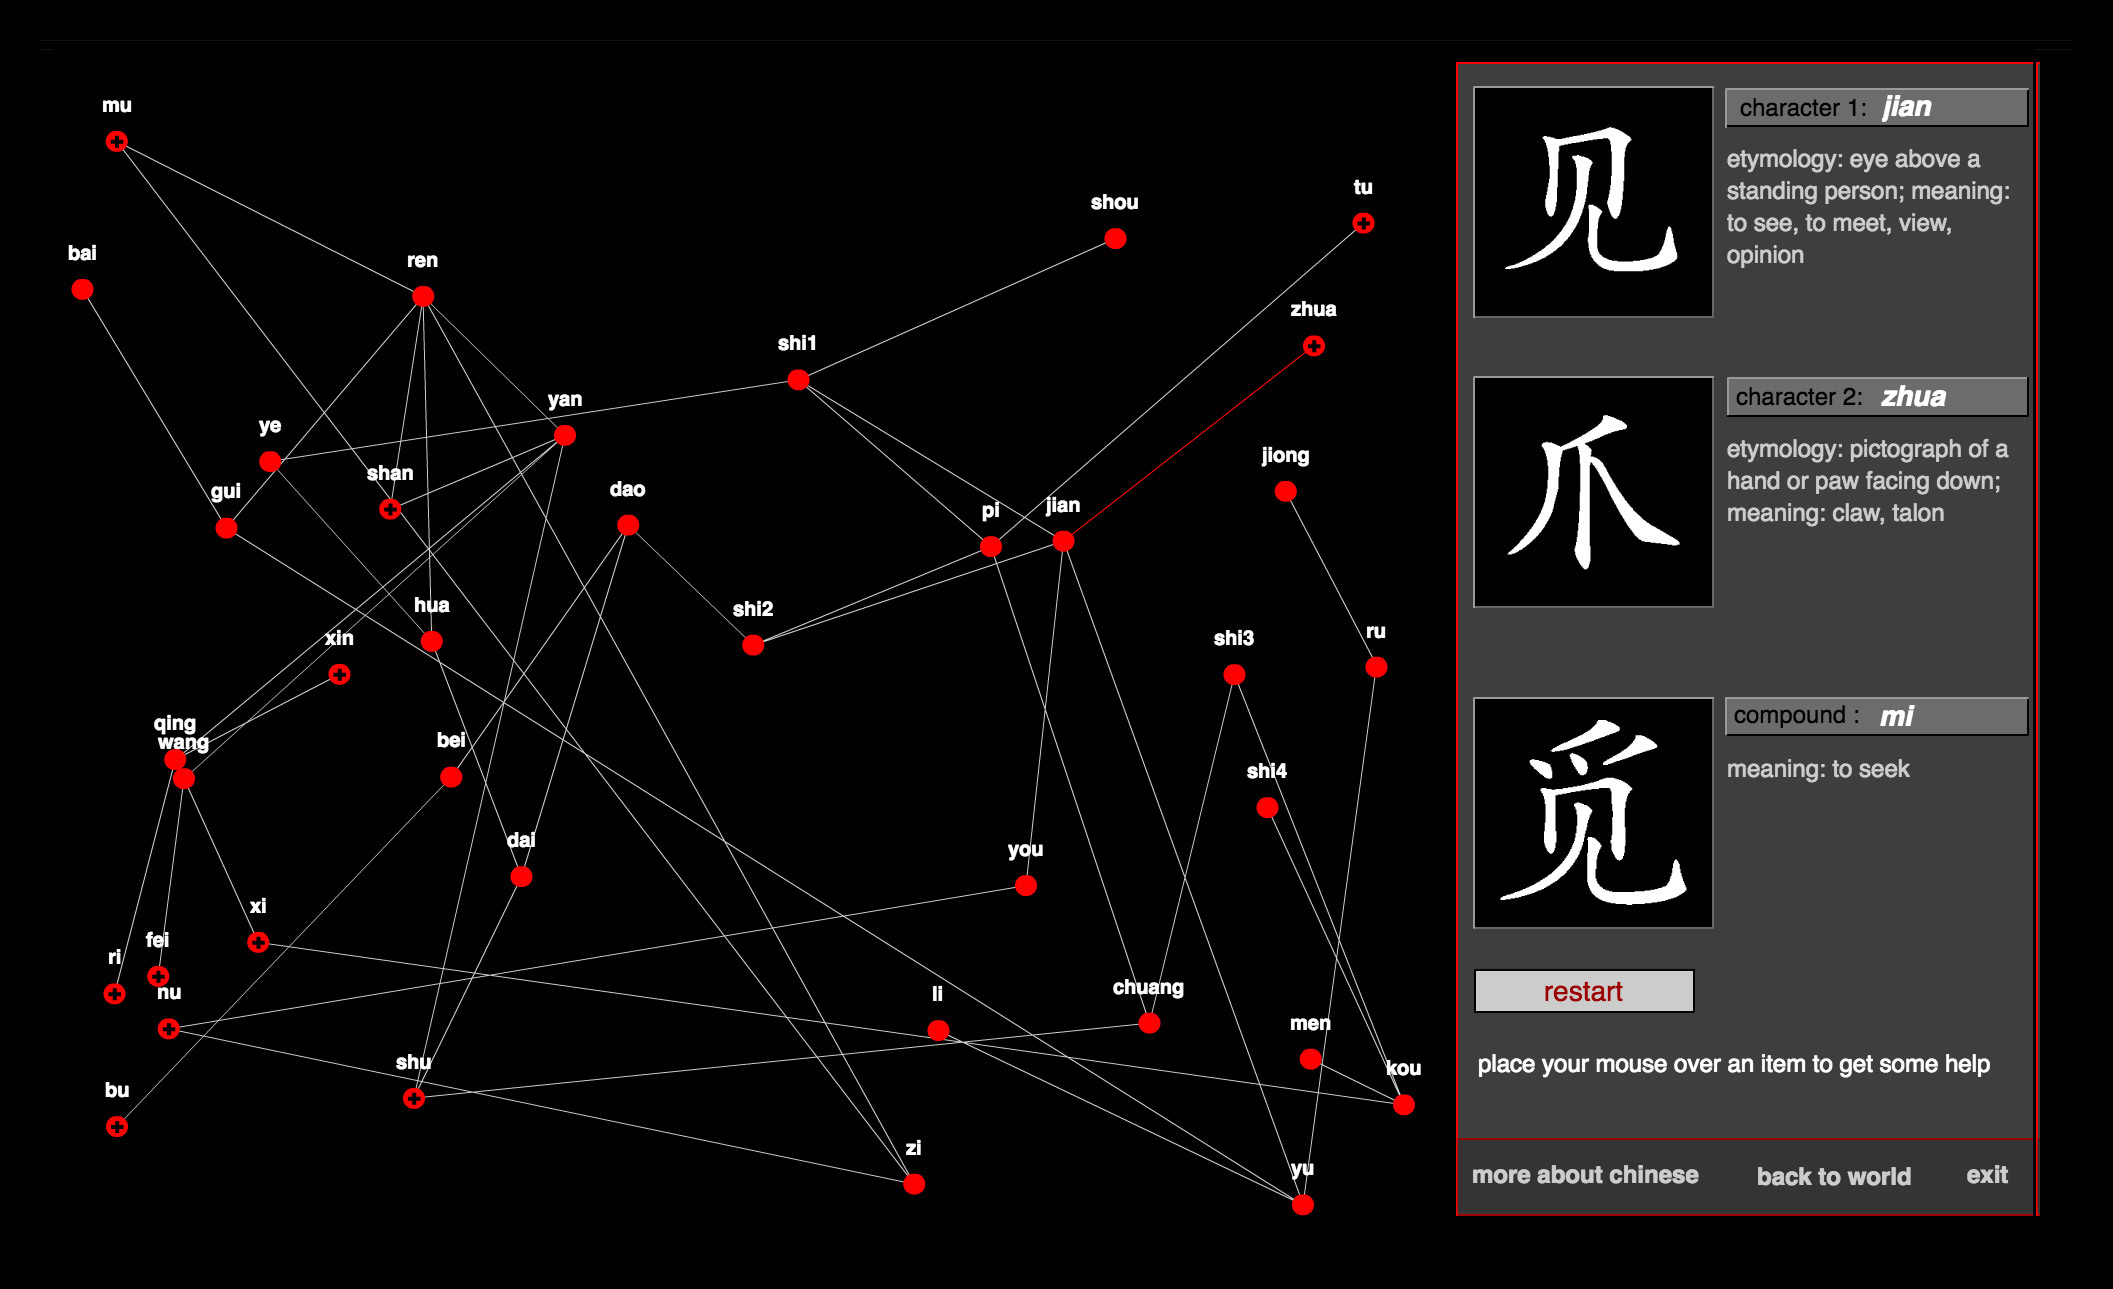 Nodes of the language (Interfaces)